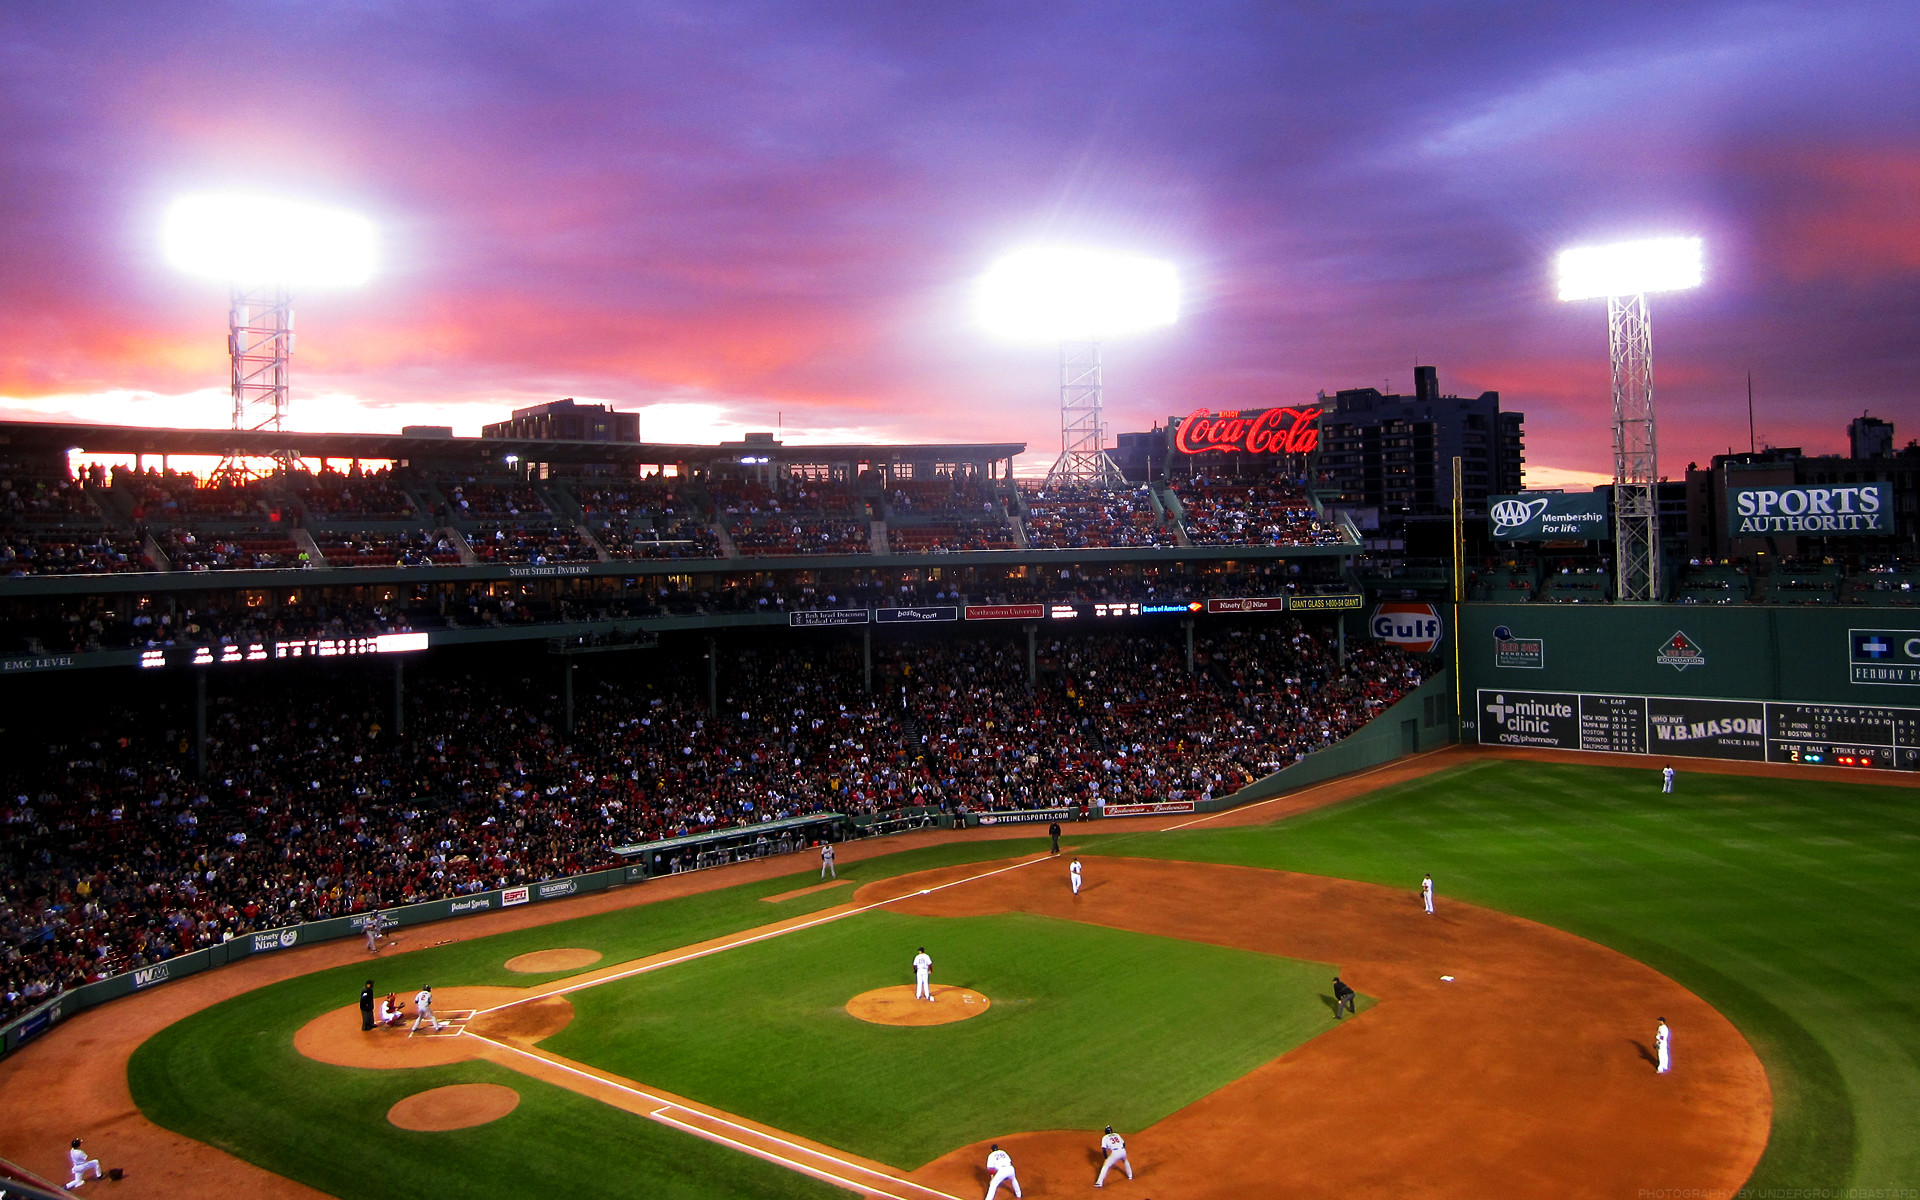 Fenway park in afternoon